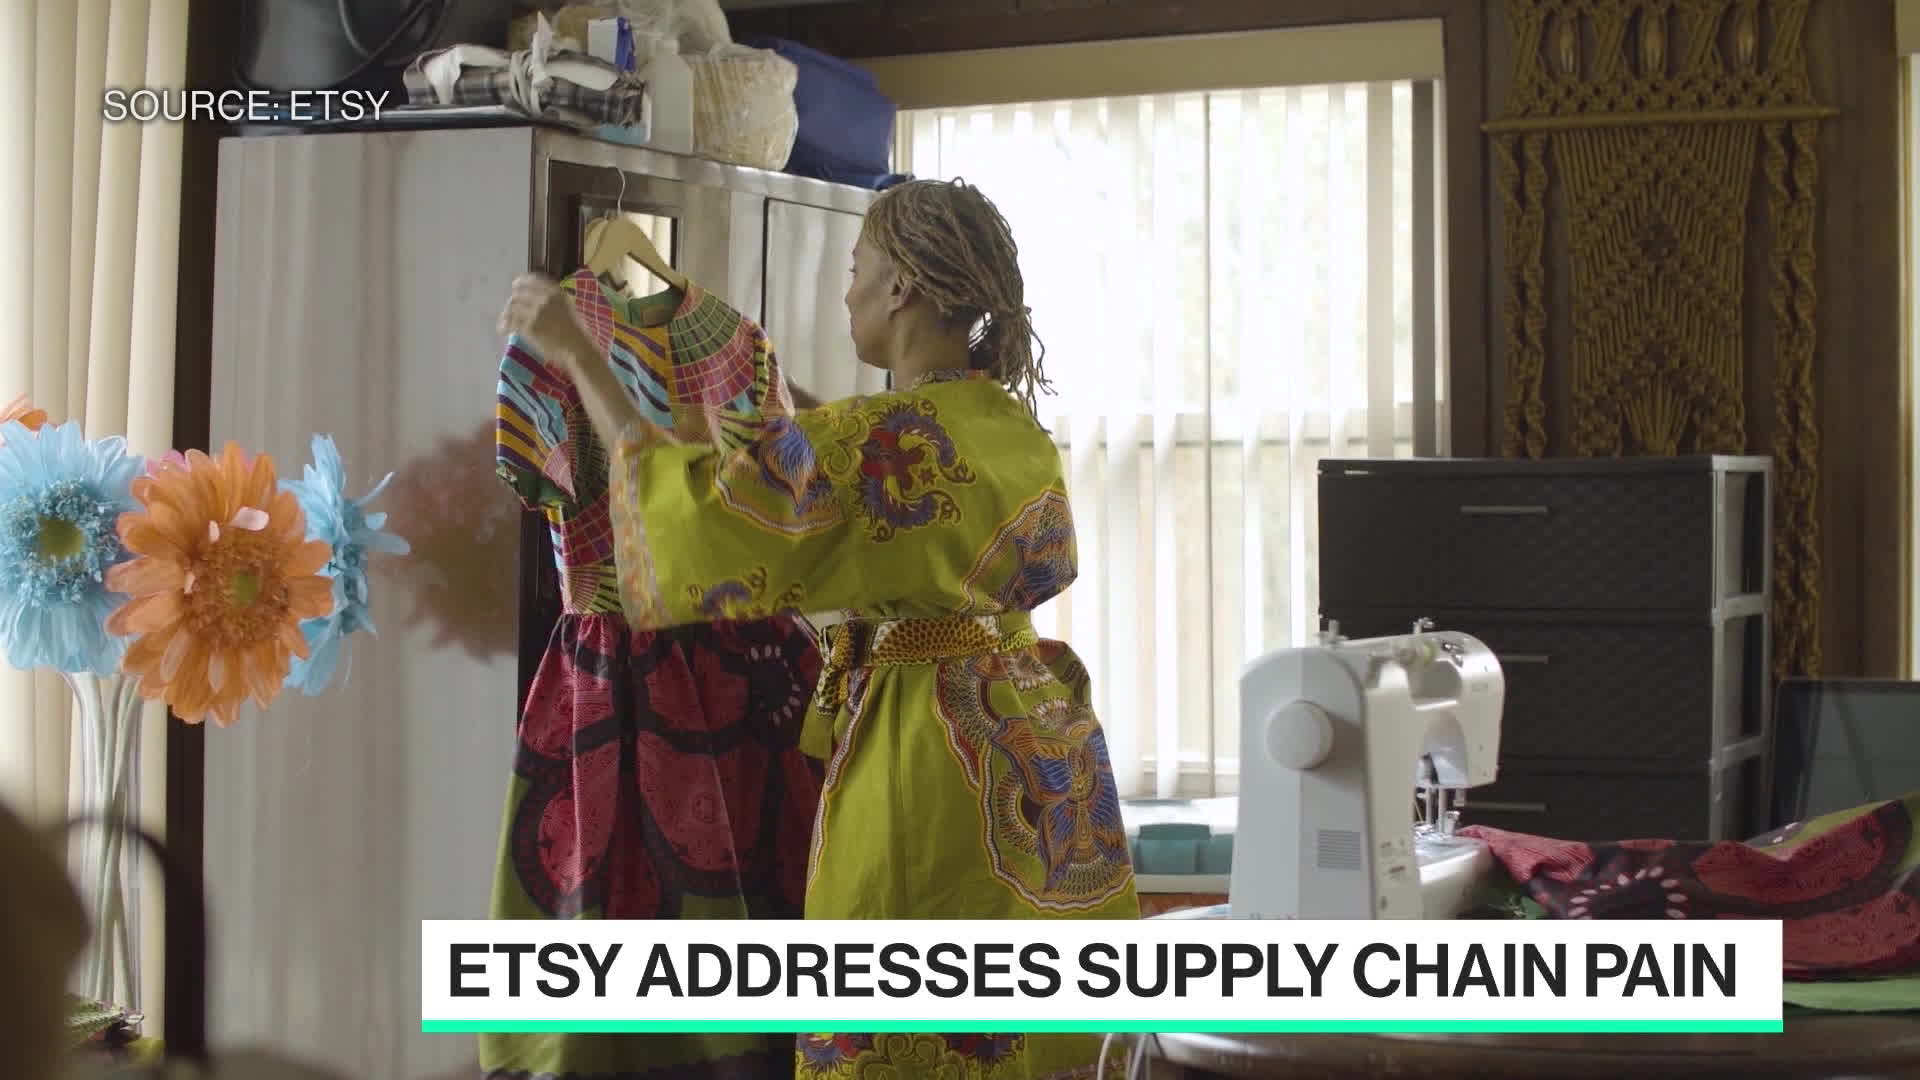 Etsy CEO Says Company is Meeting Demand